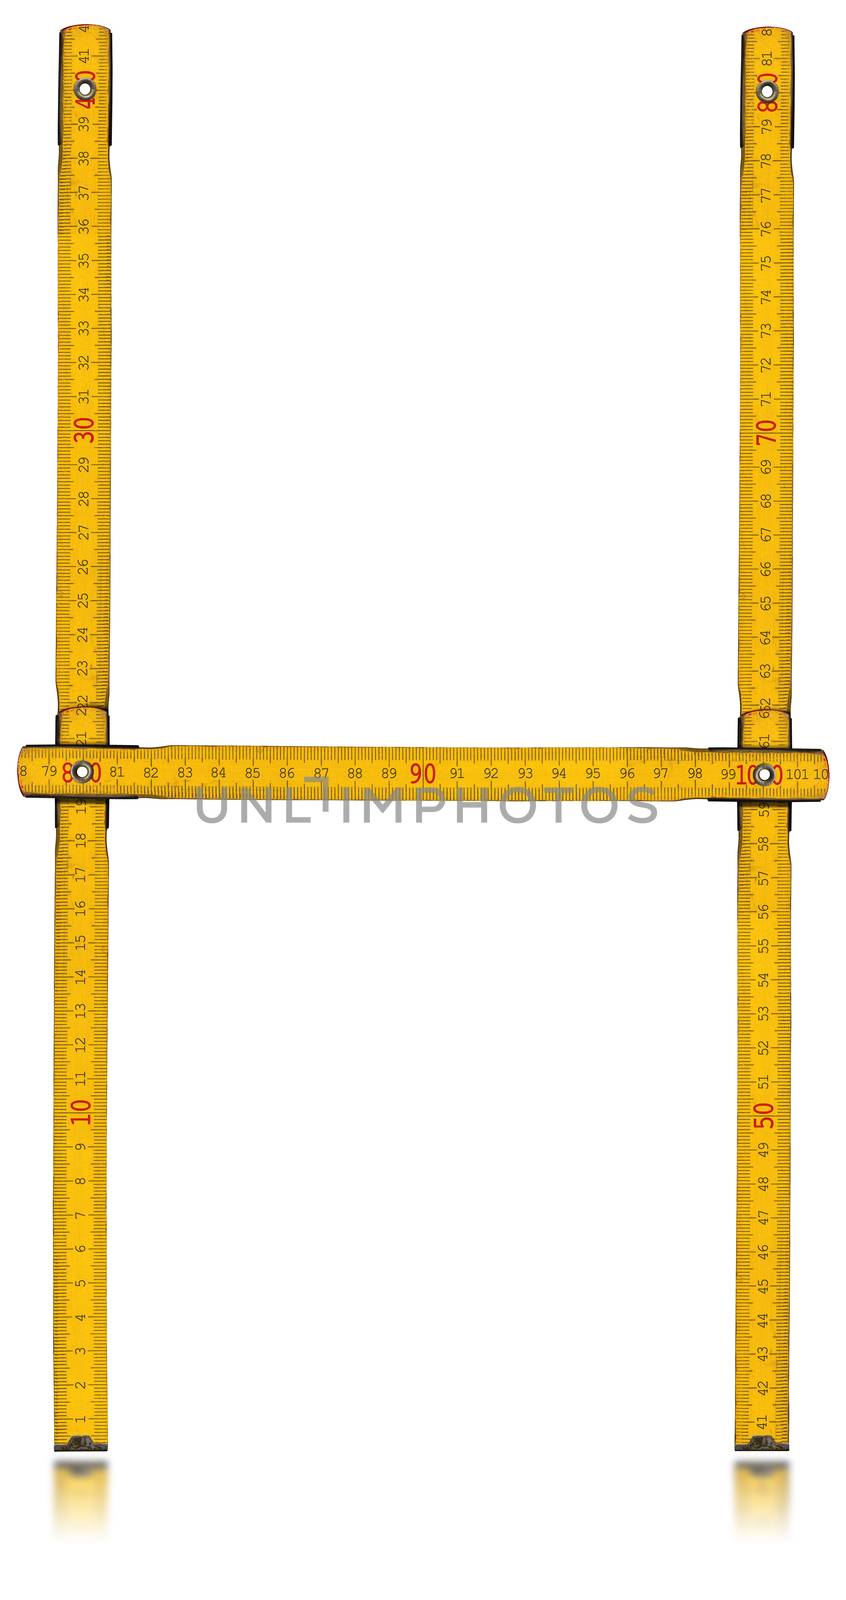 Font H - Old Yellow Meter Ruler by catalby